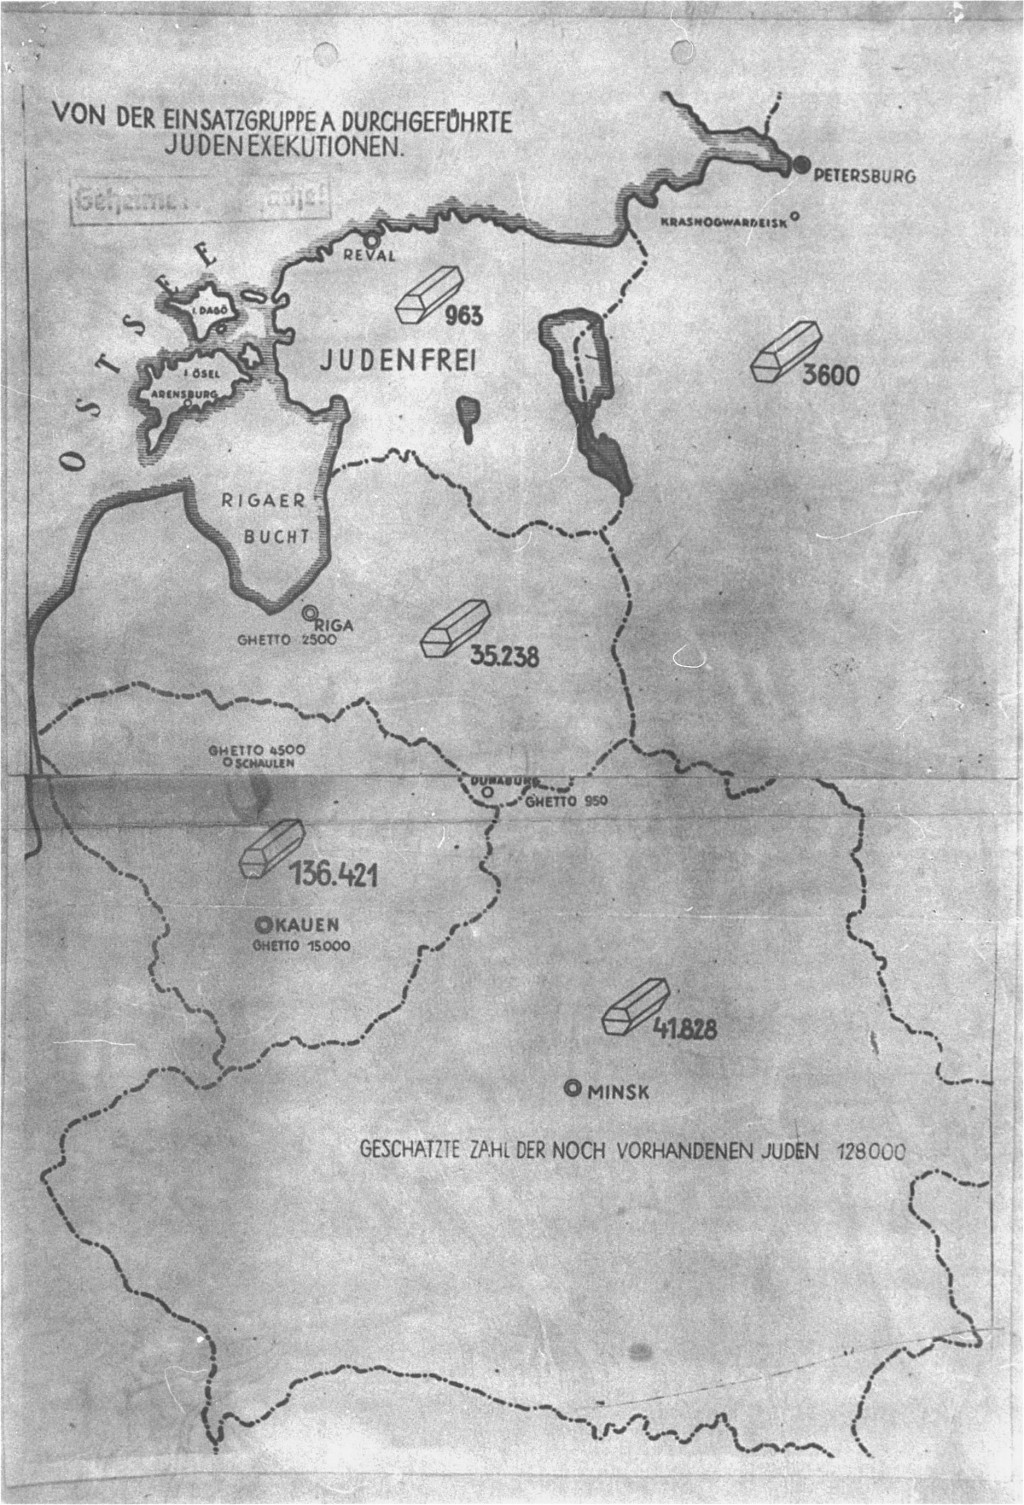 This map accompanied a secret undated German report on the mass murder of Jews by Einsatzgruppen A (mobile killing unit A). During the International Military Tribunal at Nuremberg, the map was introduced as evidence by both the American and British prosecution teams. The document, entitled "Jewish Executions Carried Out by Einsatzgruppen A" and stamped "Secret Reich Matter," shows the number of Jews executed (symbolized by coffins) in the Baltic states and Belorussia by late 1941. The legend near the bottom states that "the estimated number of Jews still on hand [was] 128,000."